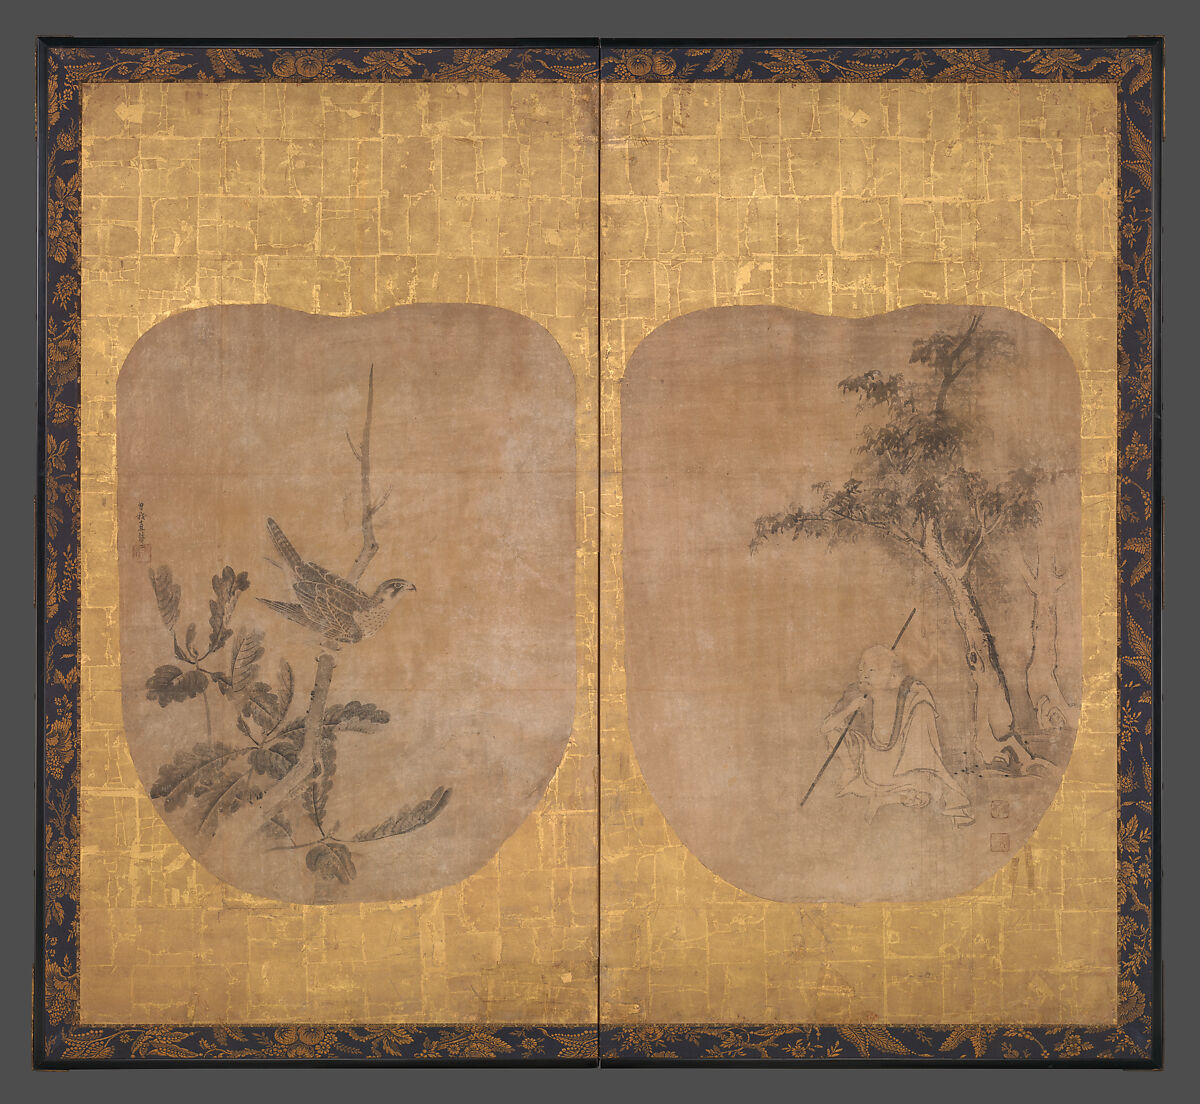 Daoist Sage and Hawk, Soga Nichokuan  Japanese, Pair of fan-shaped paintings mounted on two-panel folding screen; ink on paper, Japan